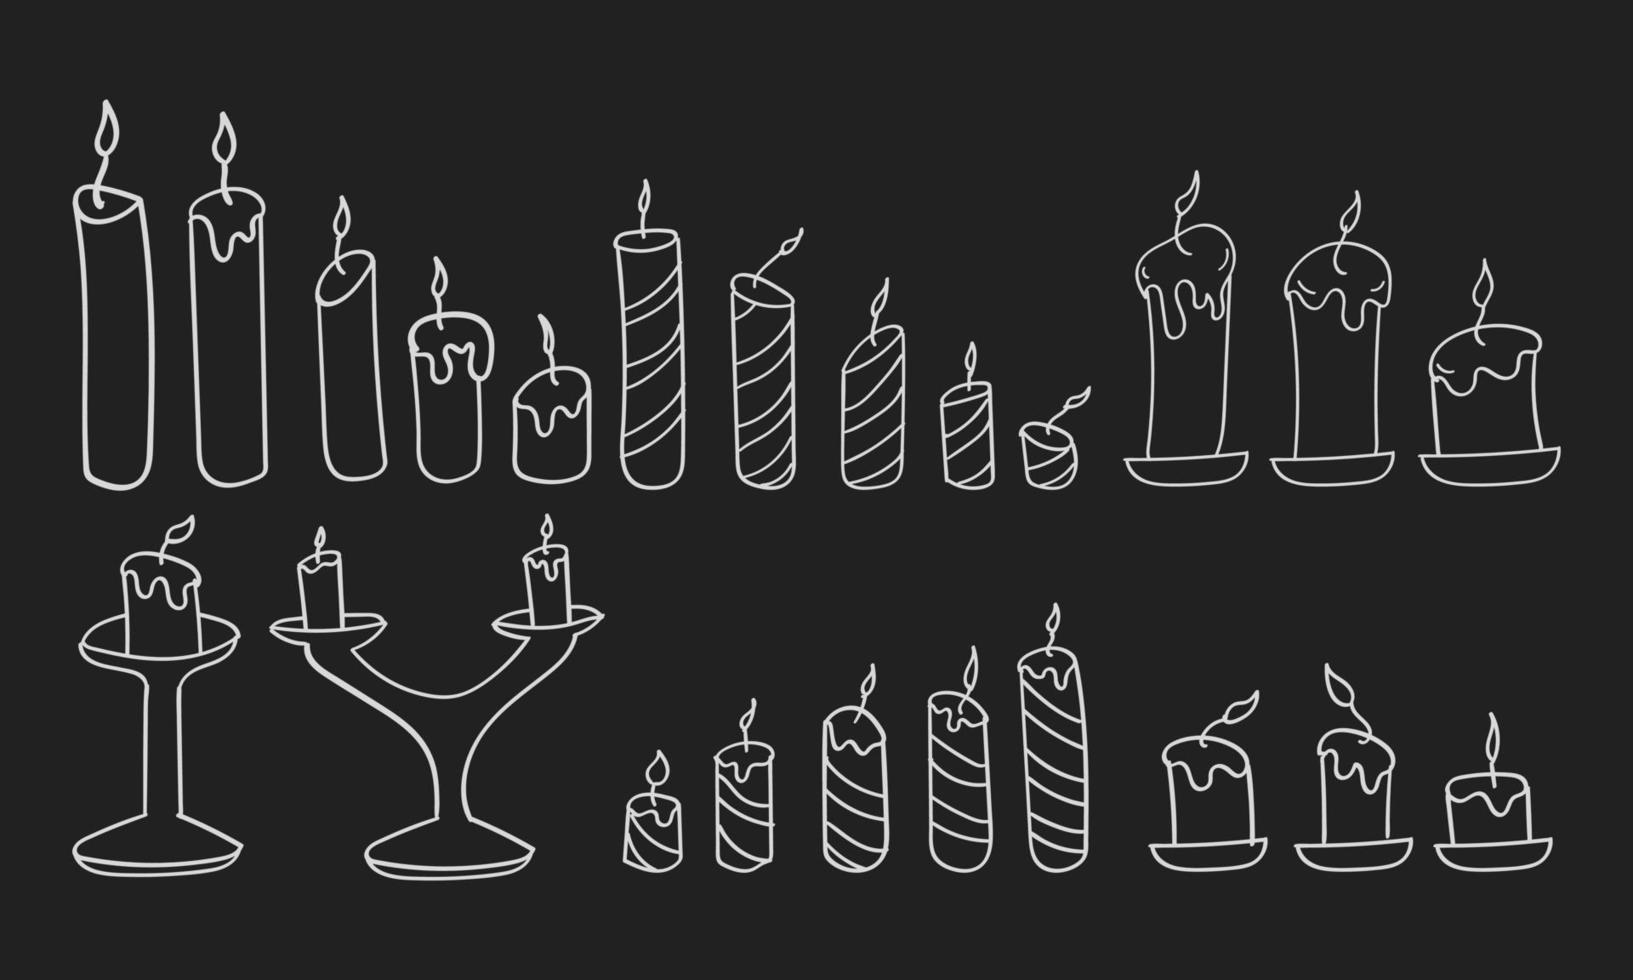 Hand drawn Candle icon on chalkboard vector